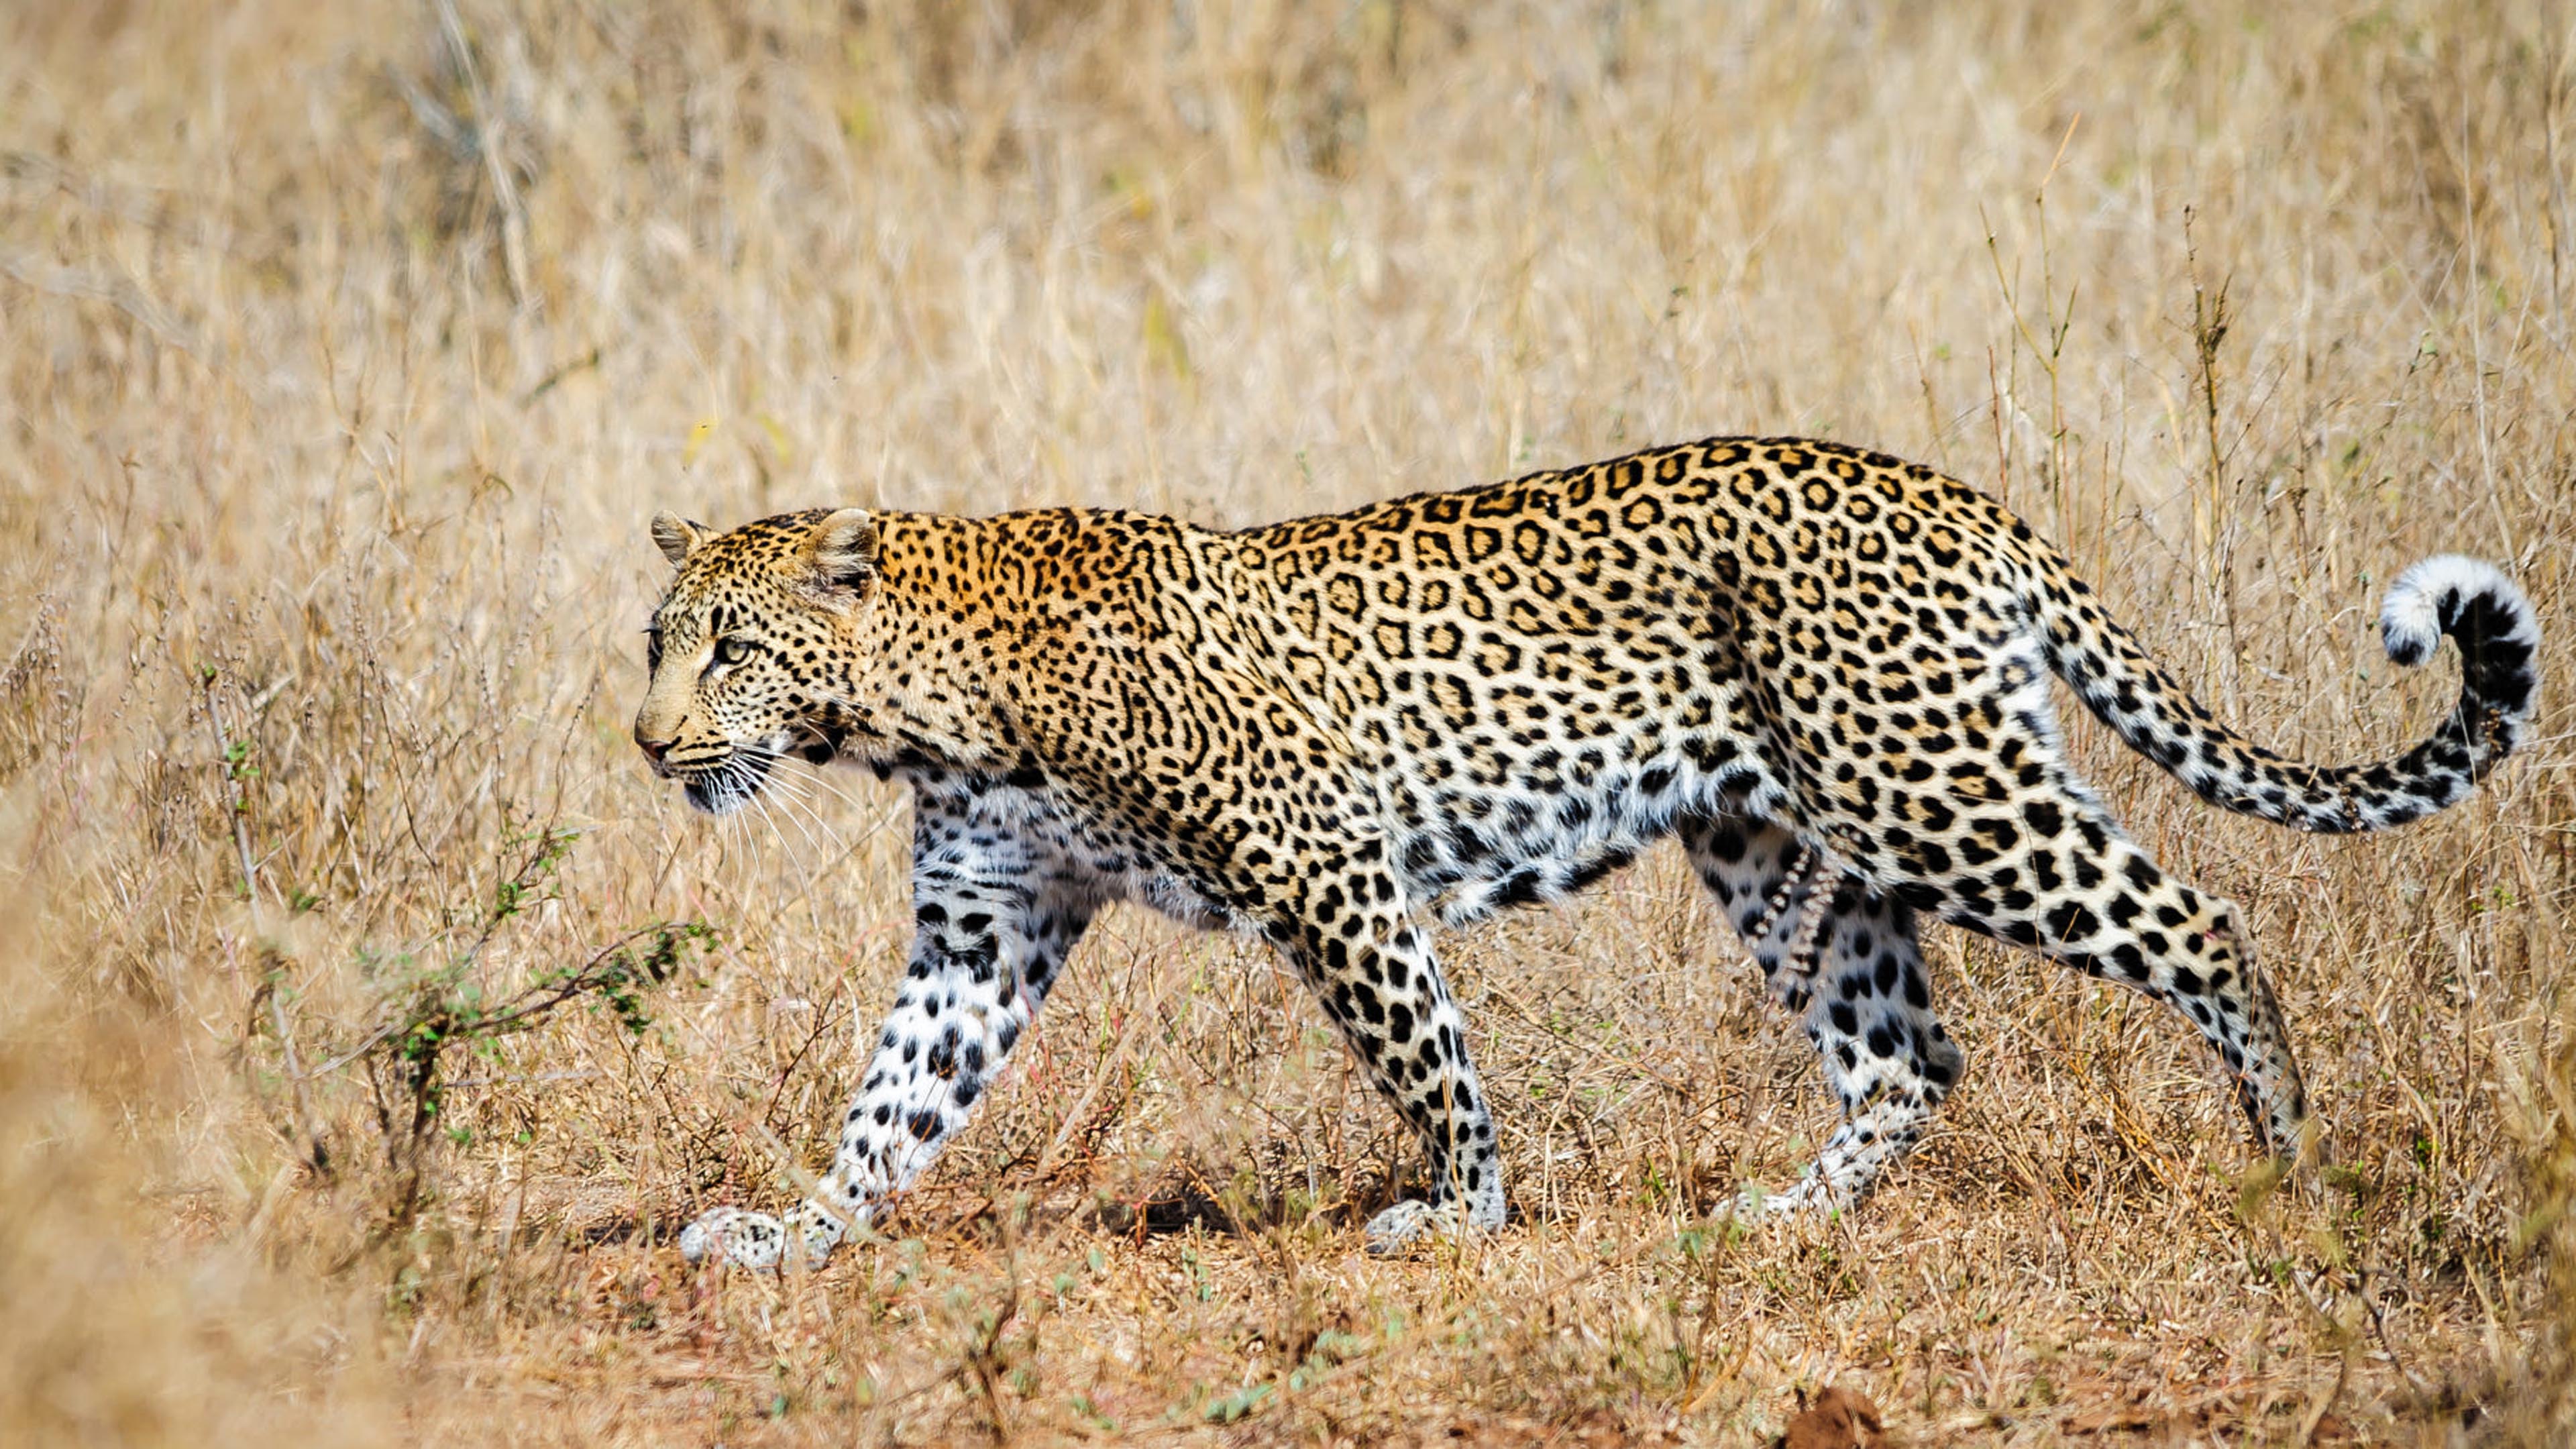 The Leopard Scientific Name Panthera Pardus Graceful Animal With Elongated  Short Legs And Long Tail 4k Ultra Hd Wallpapers For High Resolution  Computer And Laptop : 